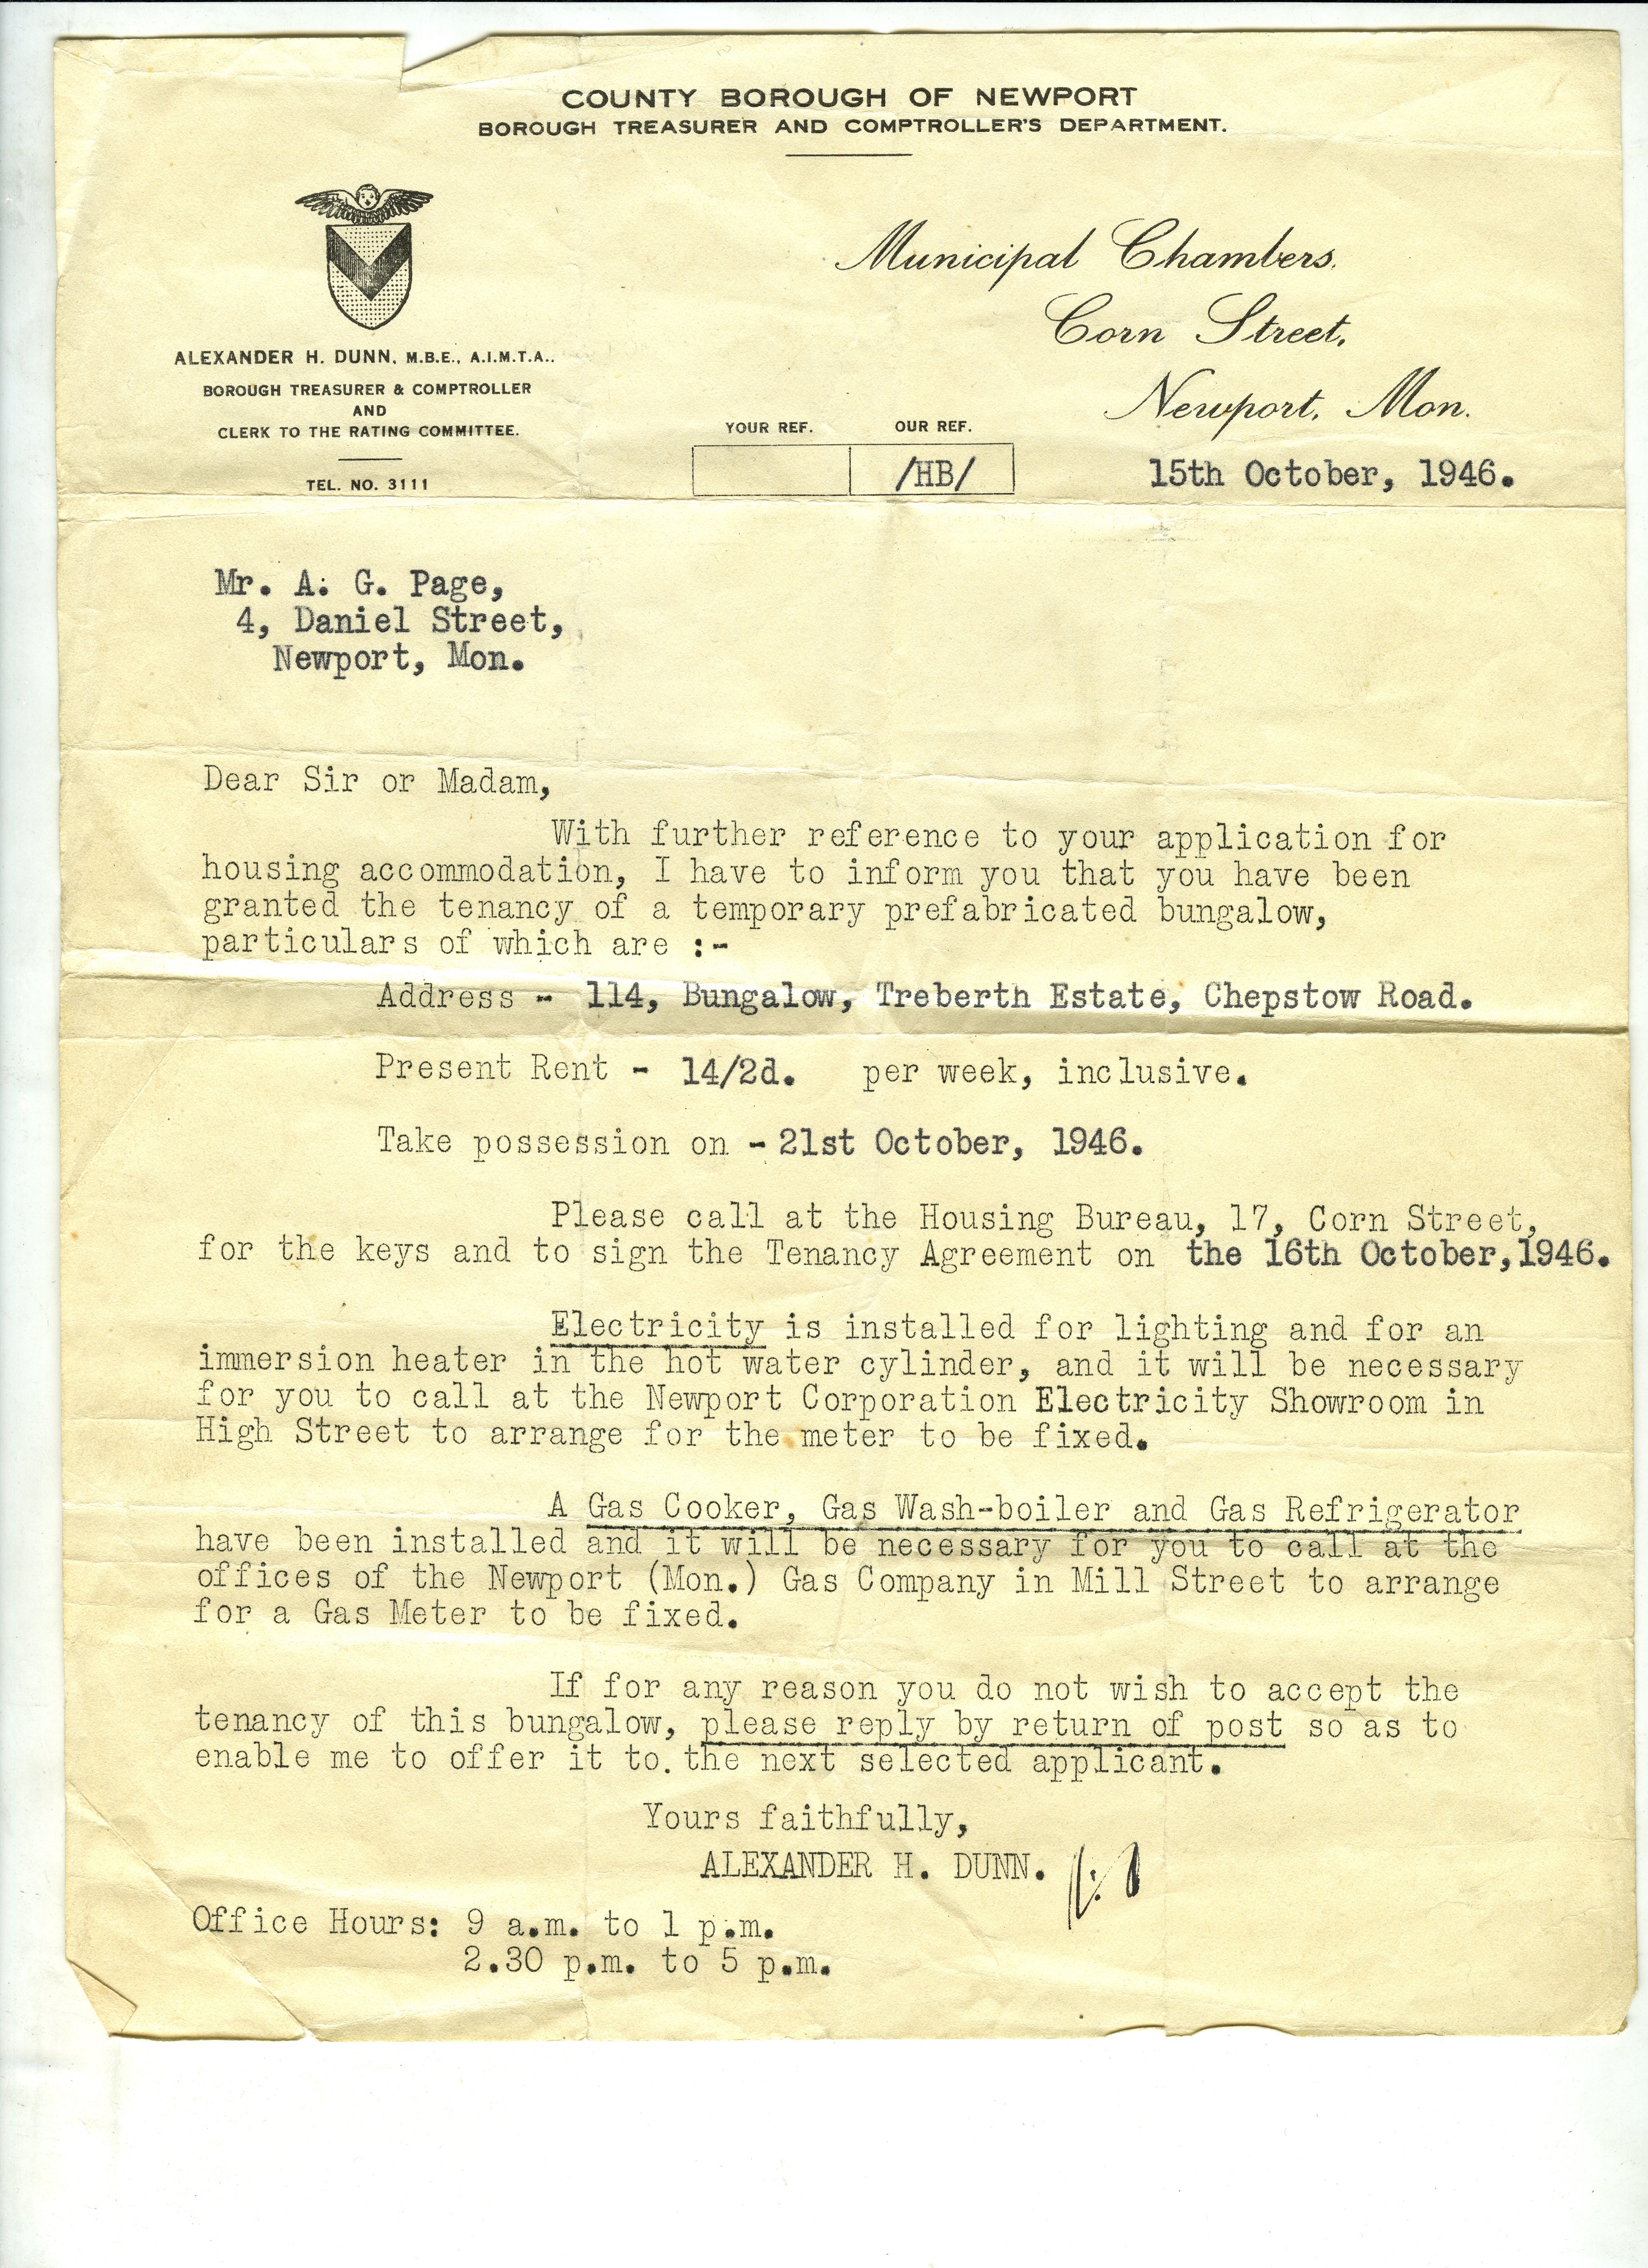 A letter of allocation of a prefab to the Page family by the County Borough of Newport 1946